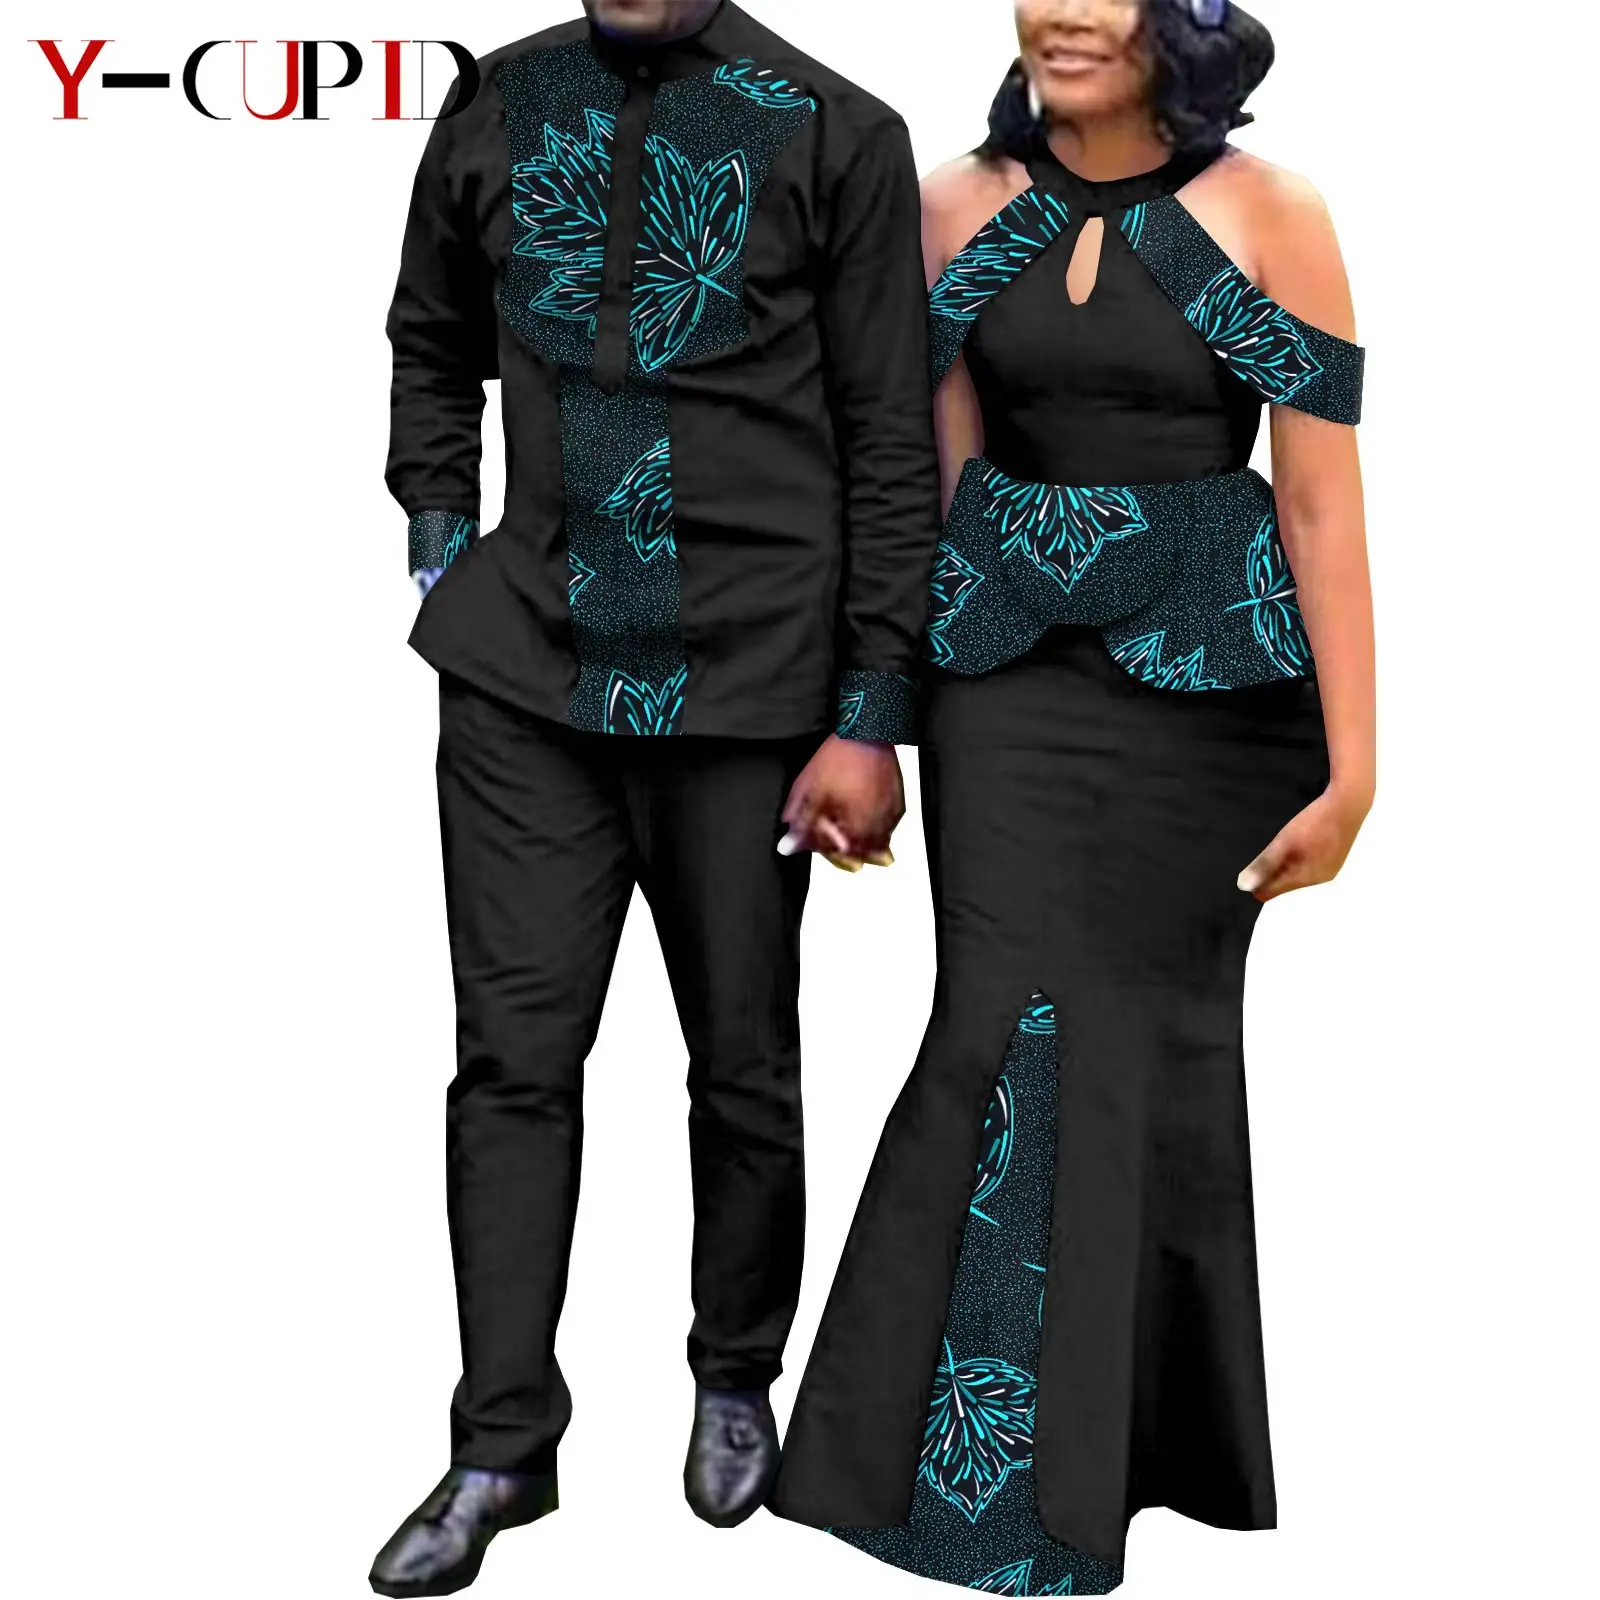 African Dresses For Women Match Men Outfits Bazin Lover Clothes Print Evening Mermaid Dress Men Shirt And Pants Sets Y21C024